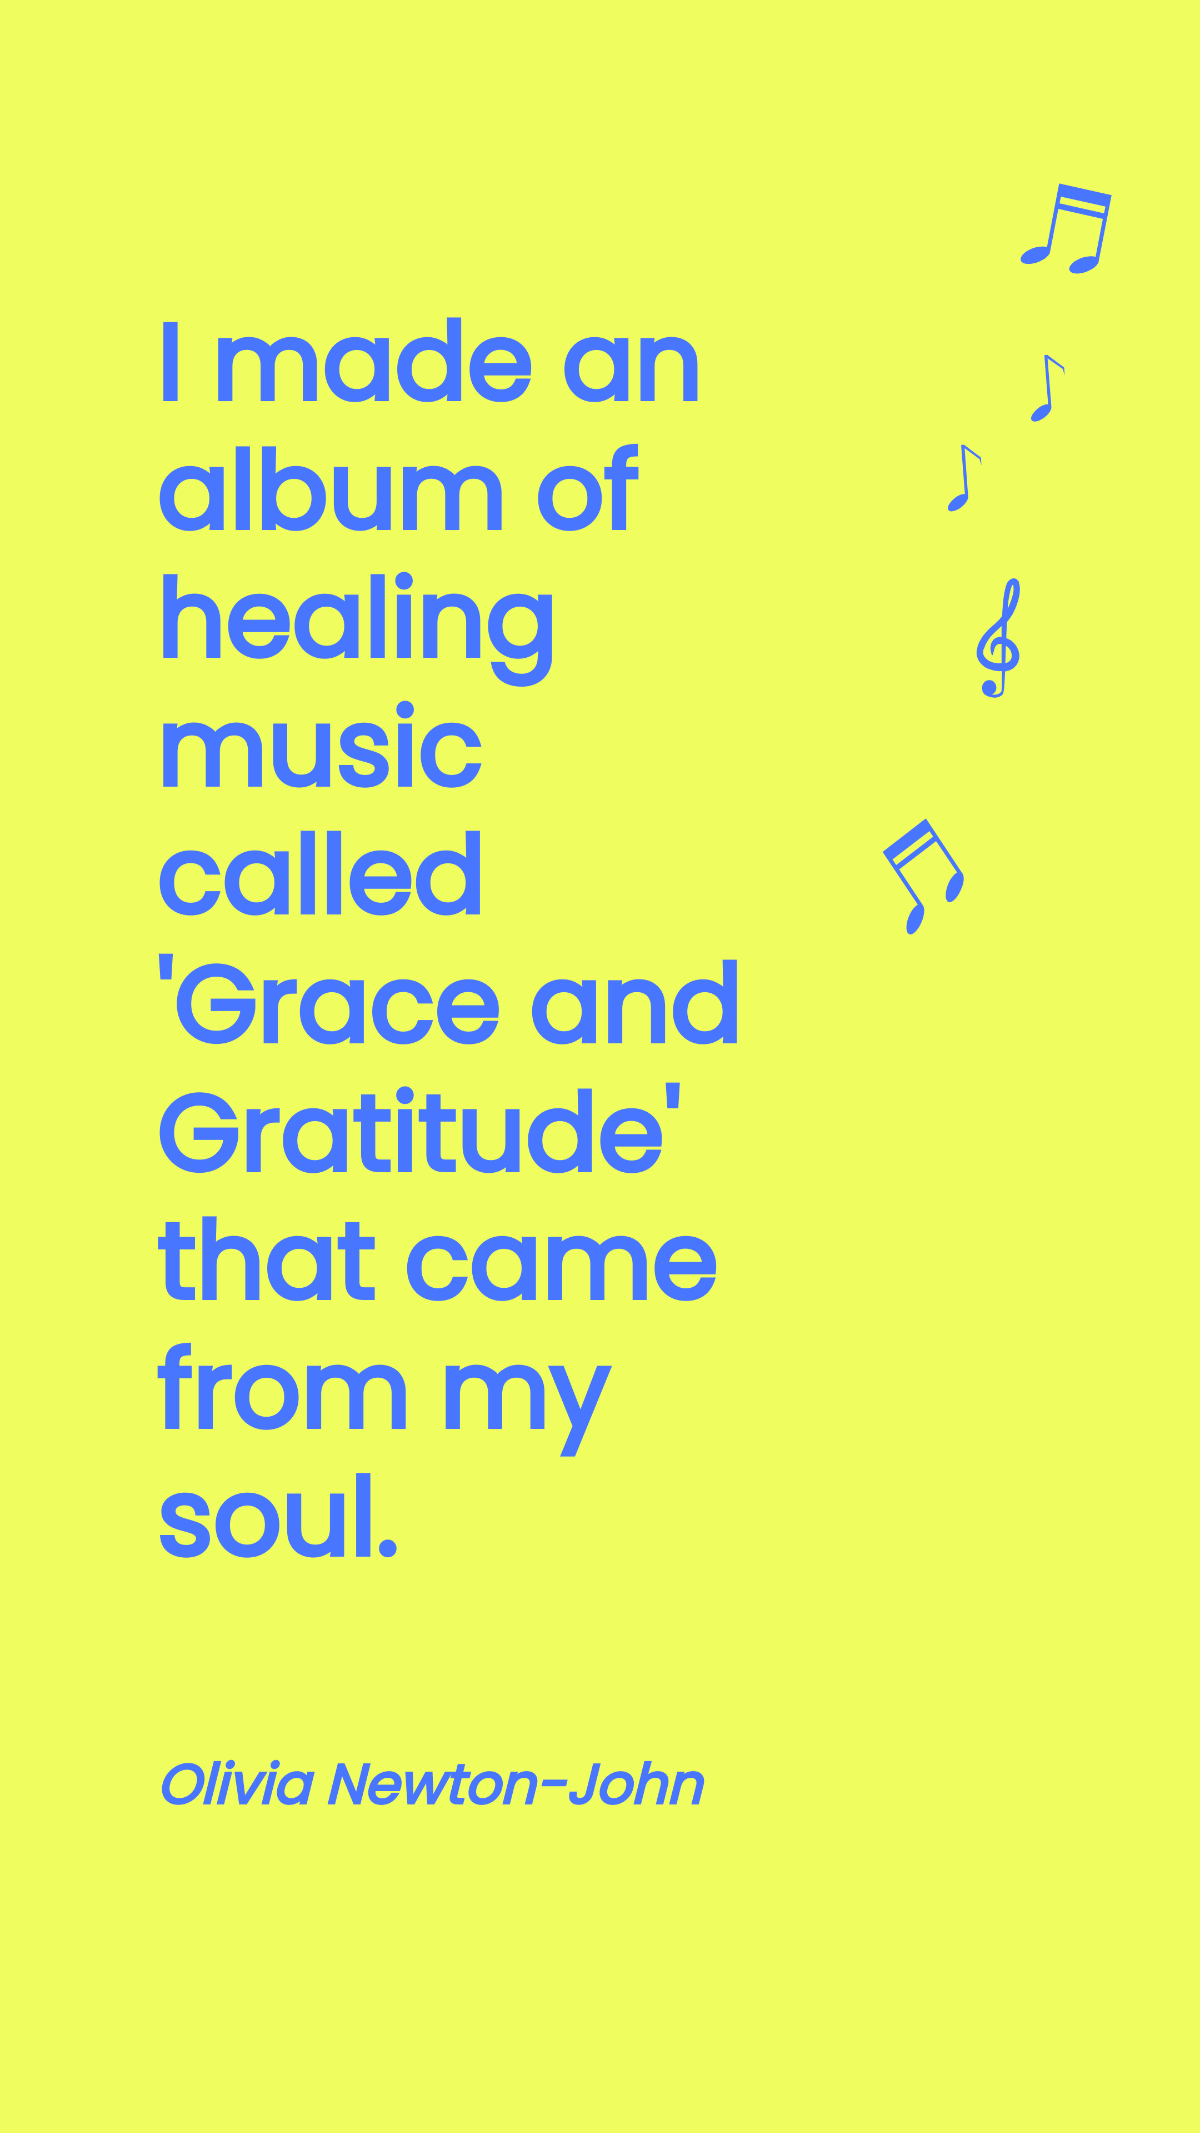 Olivia Newton-John - I made an album of healing music called 'Grace and Gratitude' that came from my soul. Template